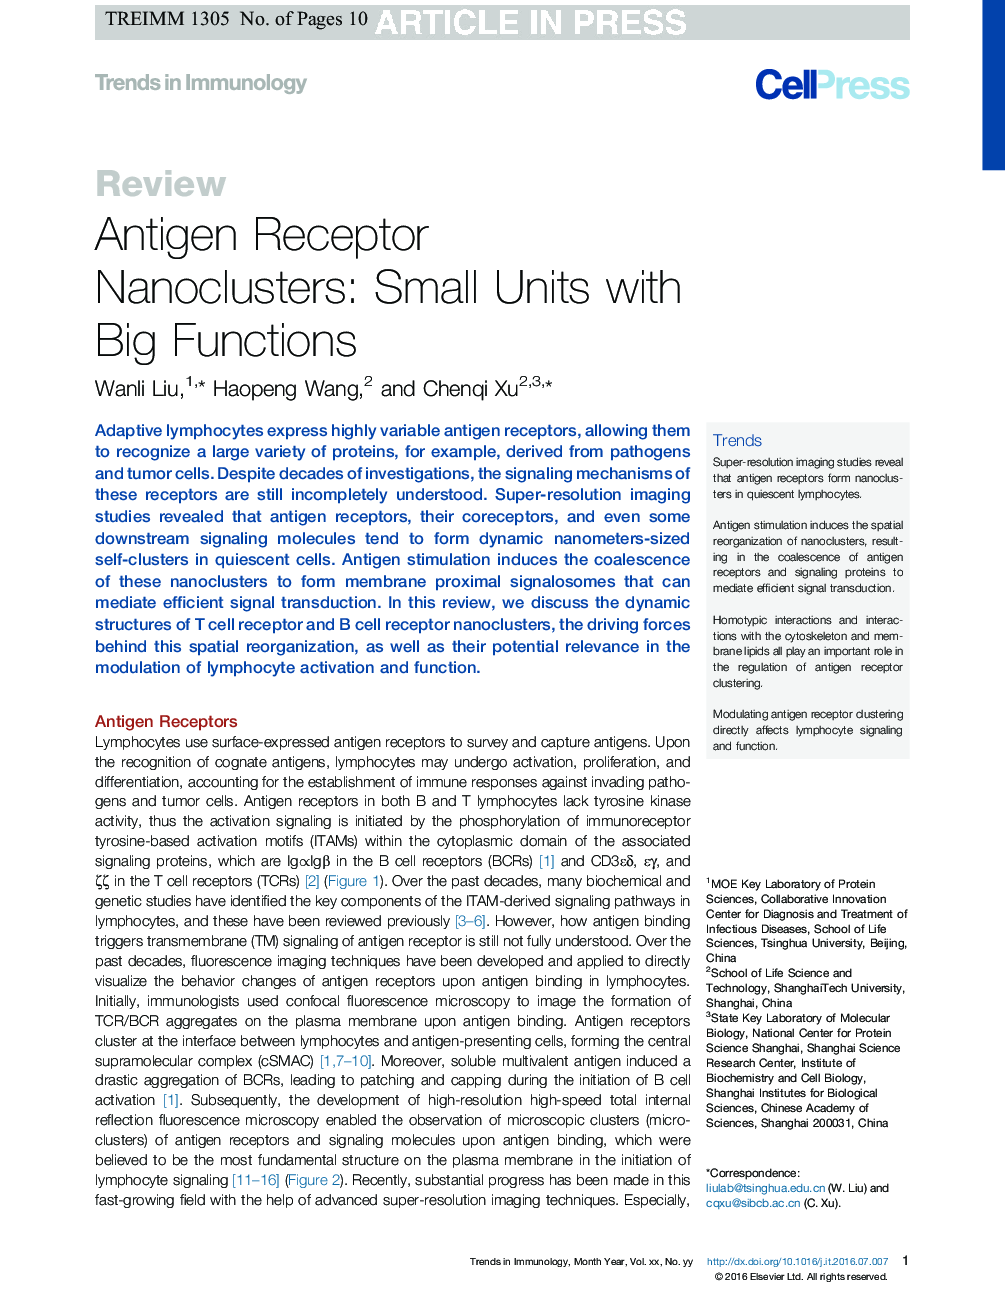 Antigen Receptor Nanoclusters: Small Units with Big Functions